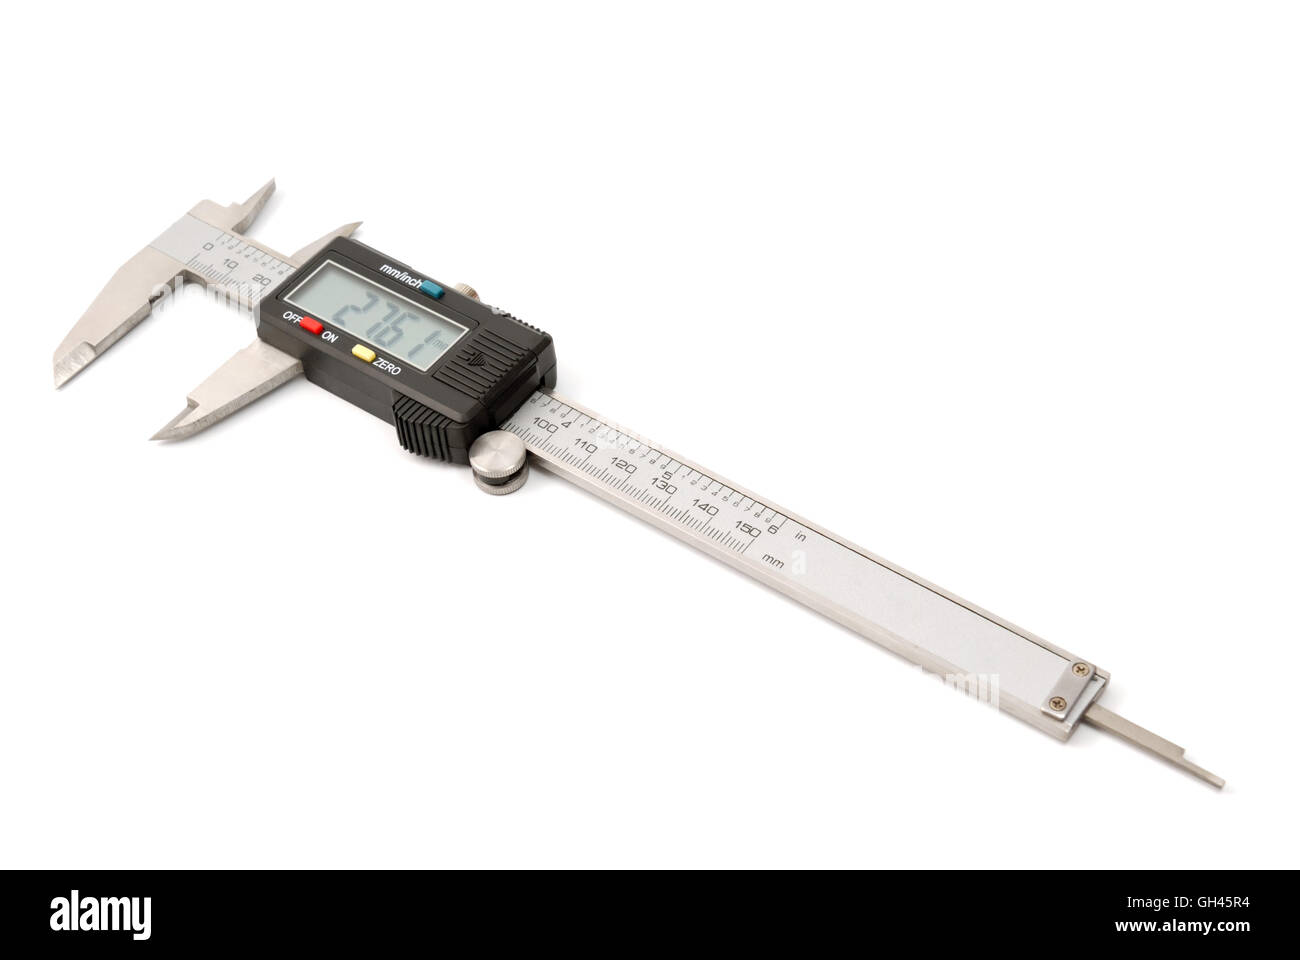 Electronic digital caliper isolated on white background. The precision tool. Stock Photo